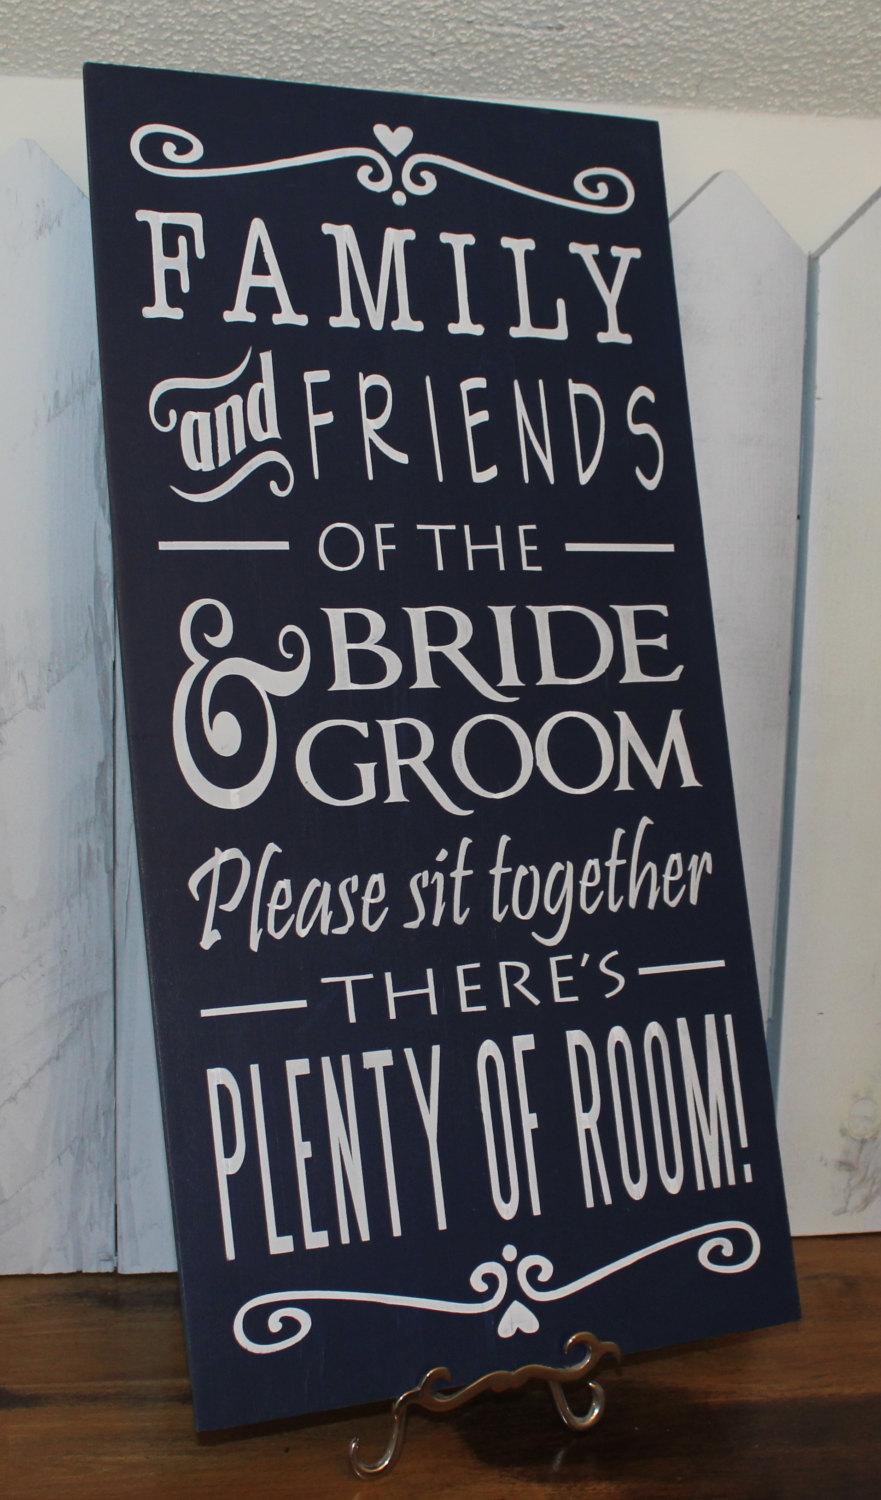 Hochzeit - No Seating Plan Sign/Family & Friends of the Bride and Groom/Please sit together